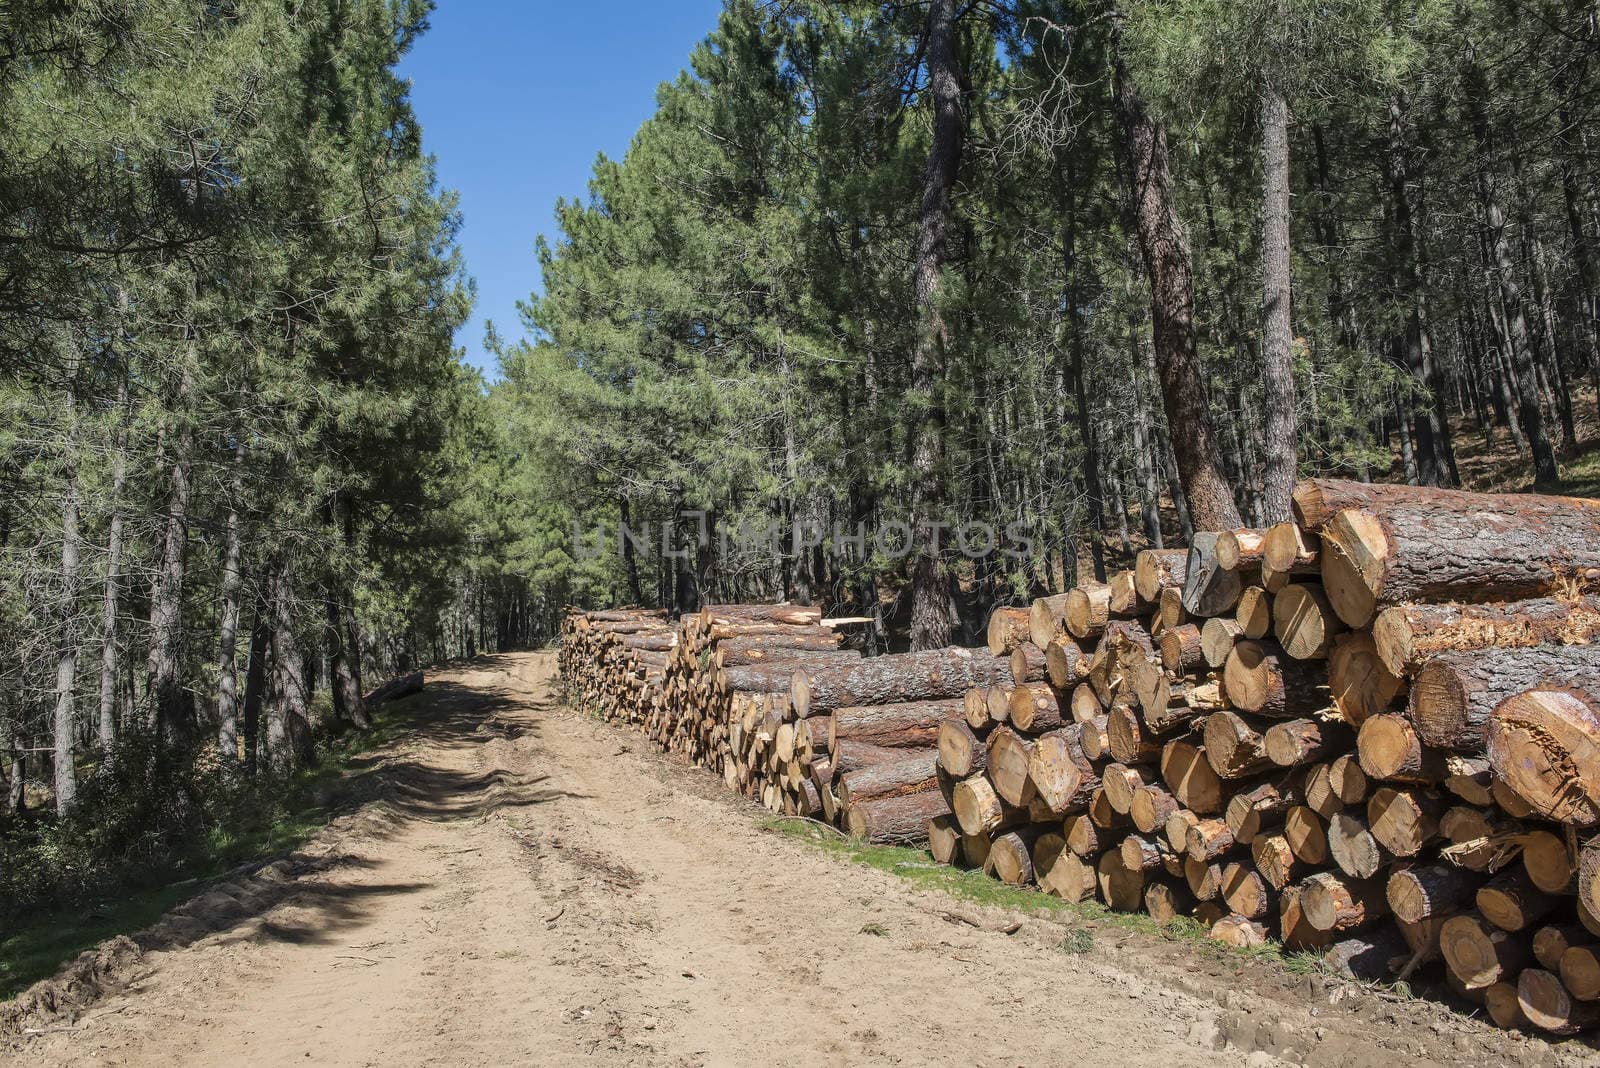 Lots of cut trees for the timber industry